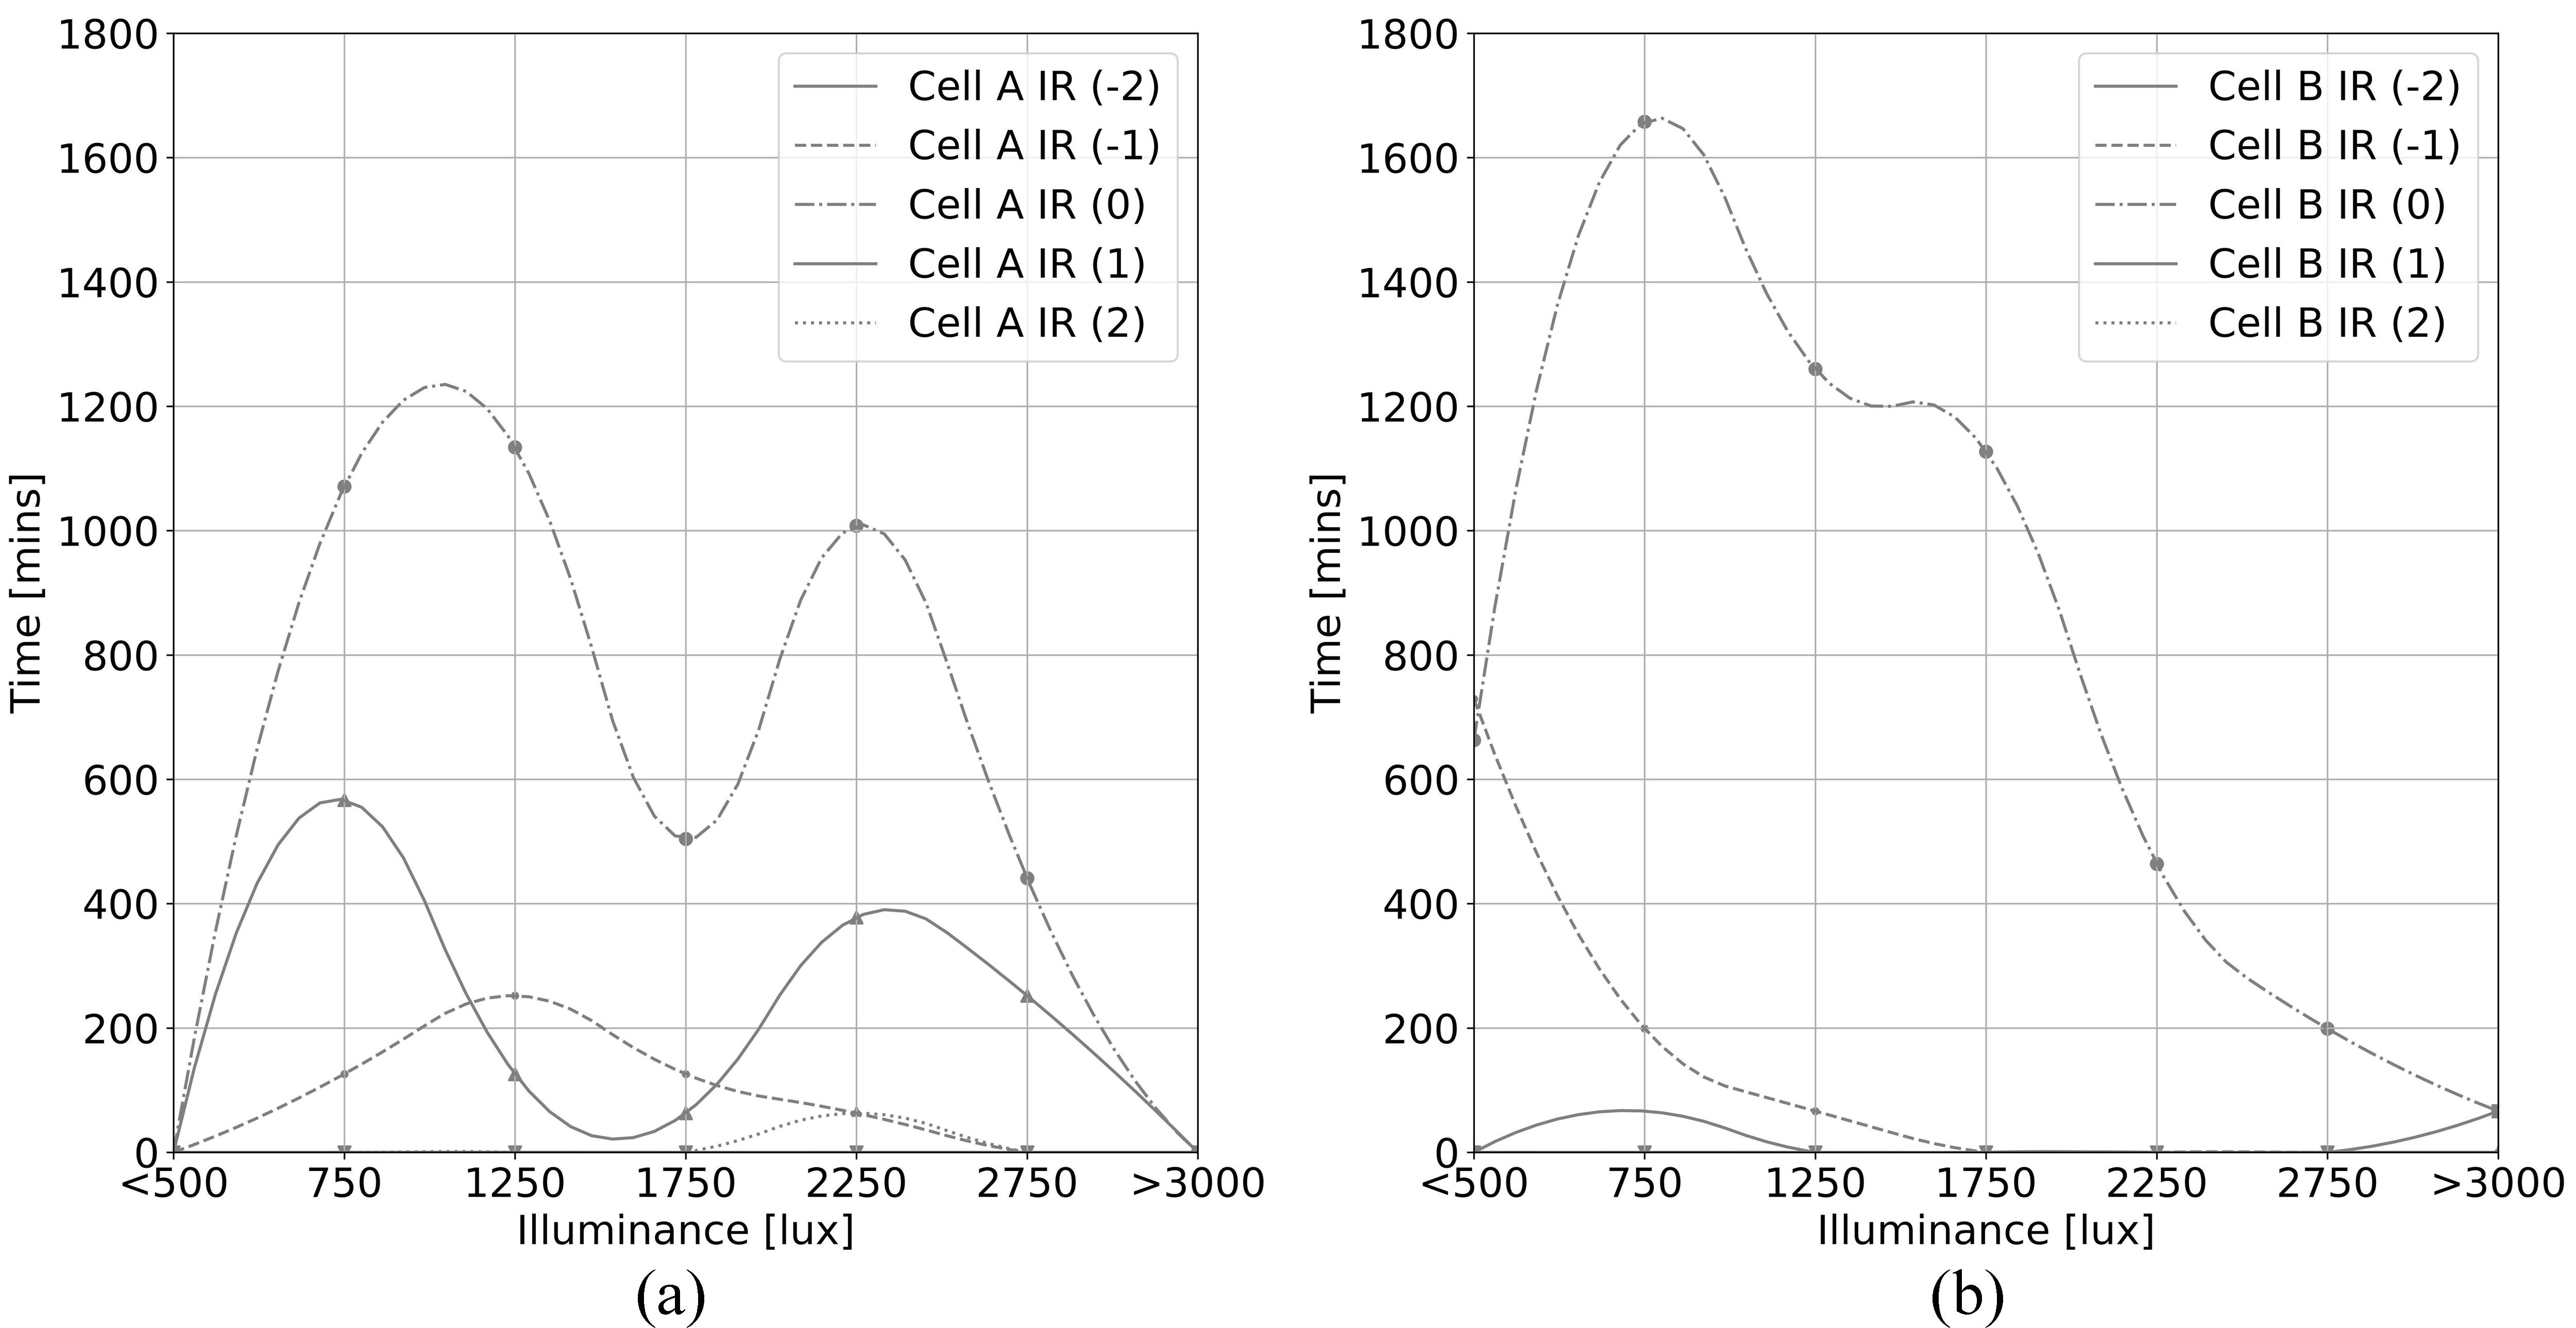 Time distribution (quadratic interpolation) of Illuminance Rating (IR) per step of illuminance: (a) Cell A and (b) cell B.